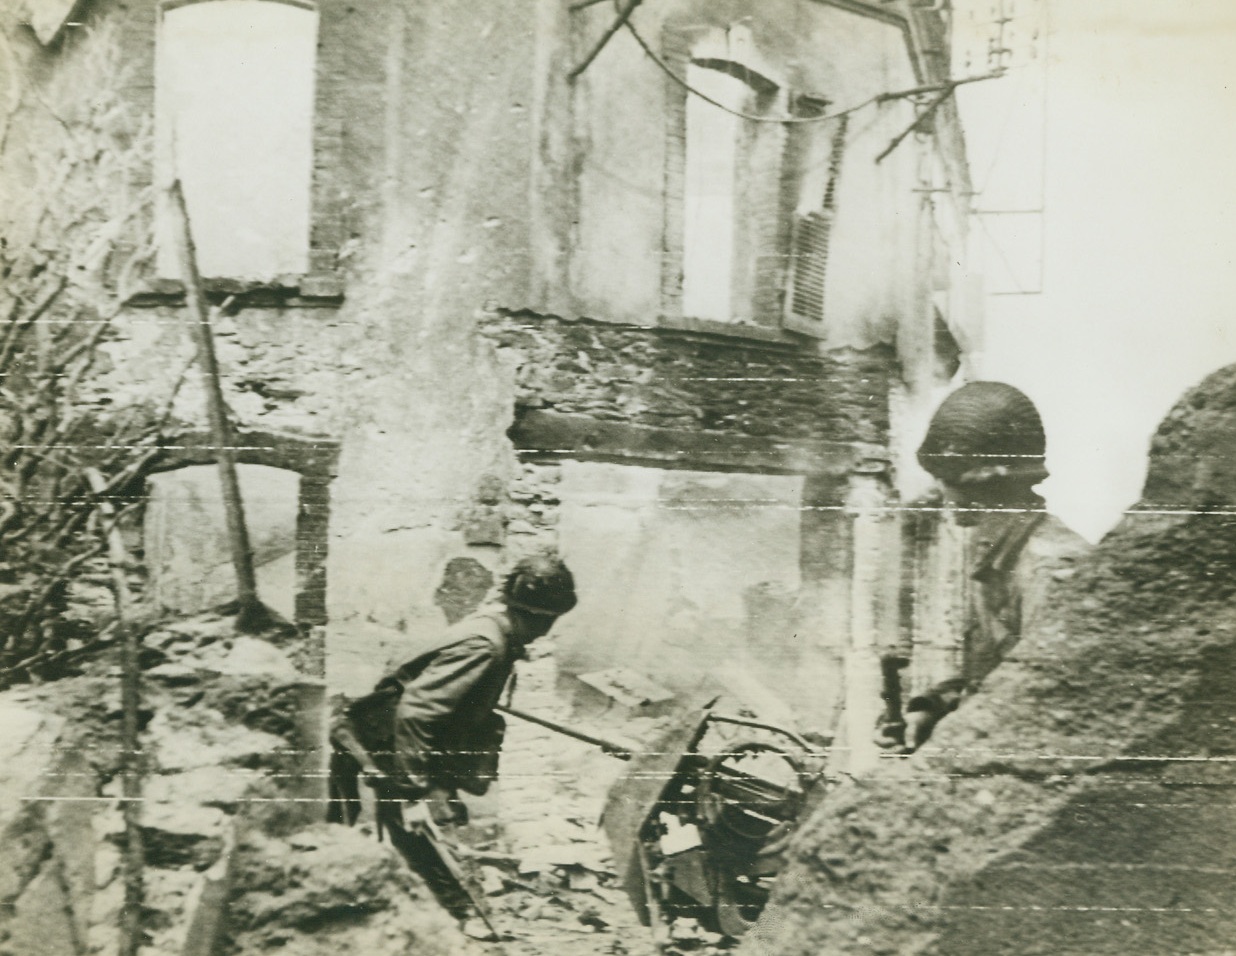 Sniper Hunt, 6/27/1944. Cherbourg, France – Amid the ruins of Cherbourg, two American soldiers peer at a window from which a German sniper had been shooting at U.S. troops. Photo, flashed to the U.S. by radiotelephoto today, was taken during the hand-to-hand fighting in the streets of the important channel port after the Nazi commanders had surrendered. Credit: ACME photo by Bert Brandt for War Picture Pool via Army Radiotelephoto;